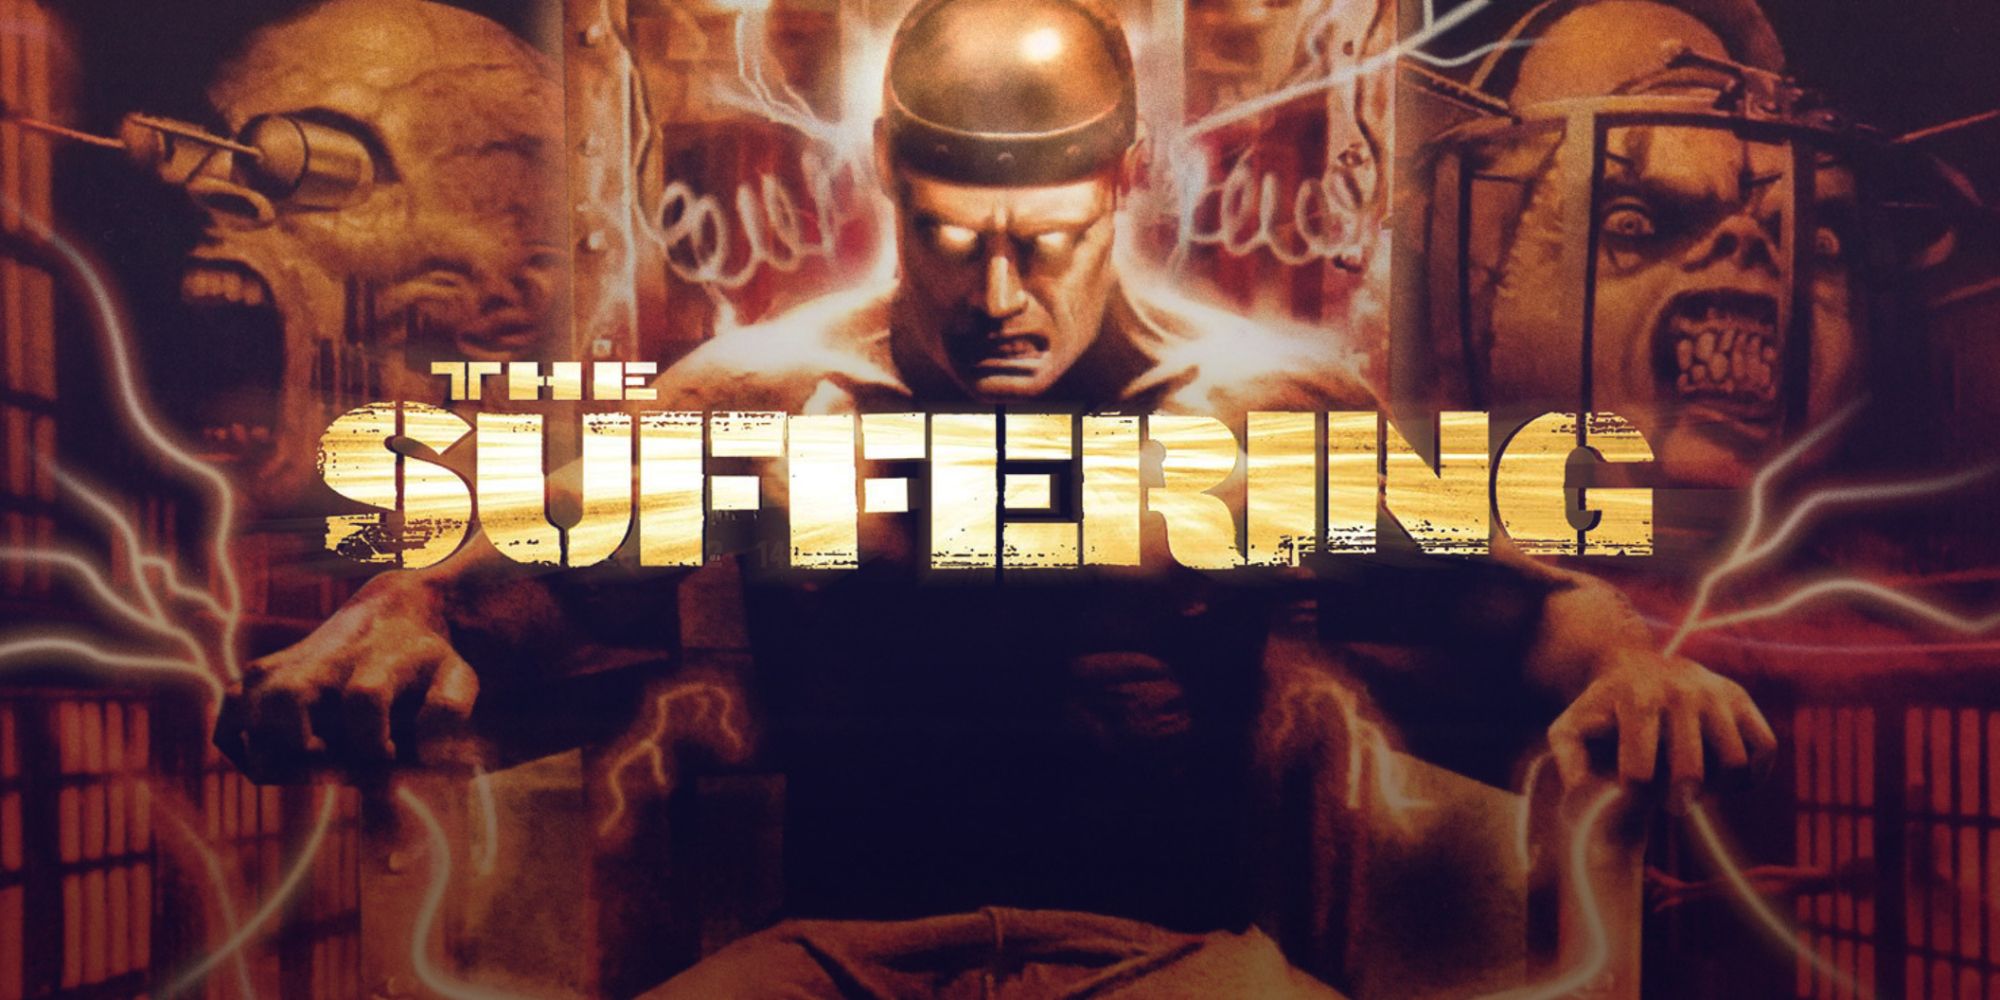 Concept Art for the Ps2 Game, The Suffering.